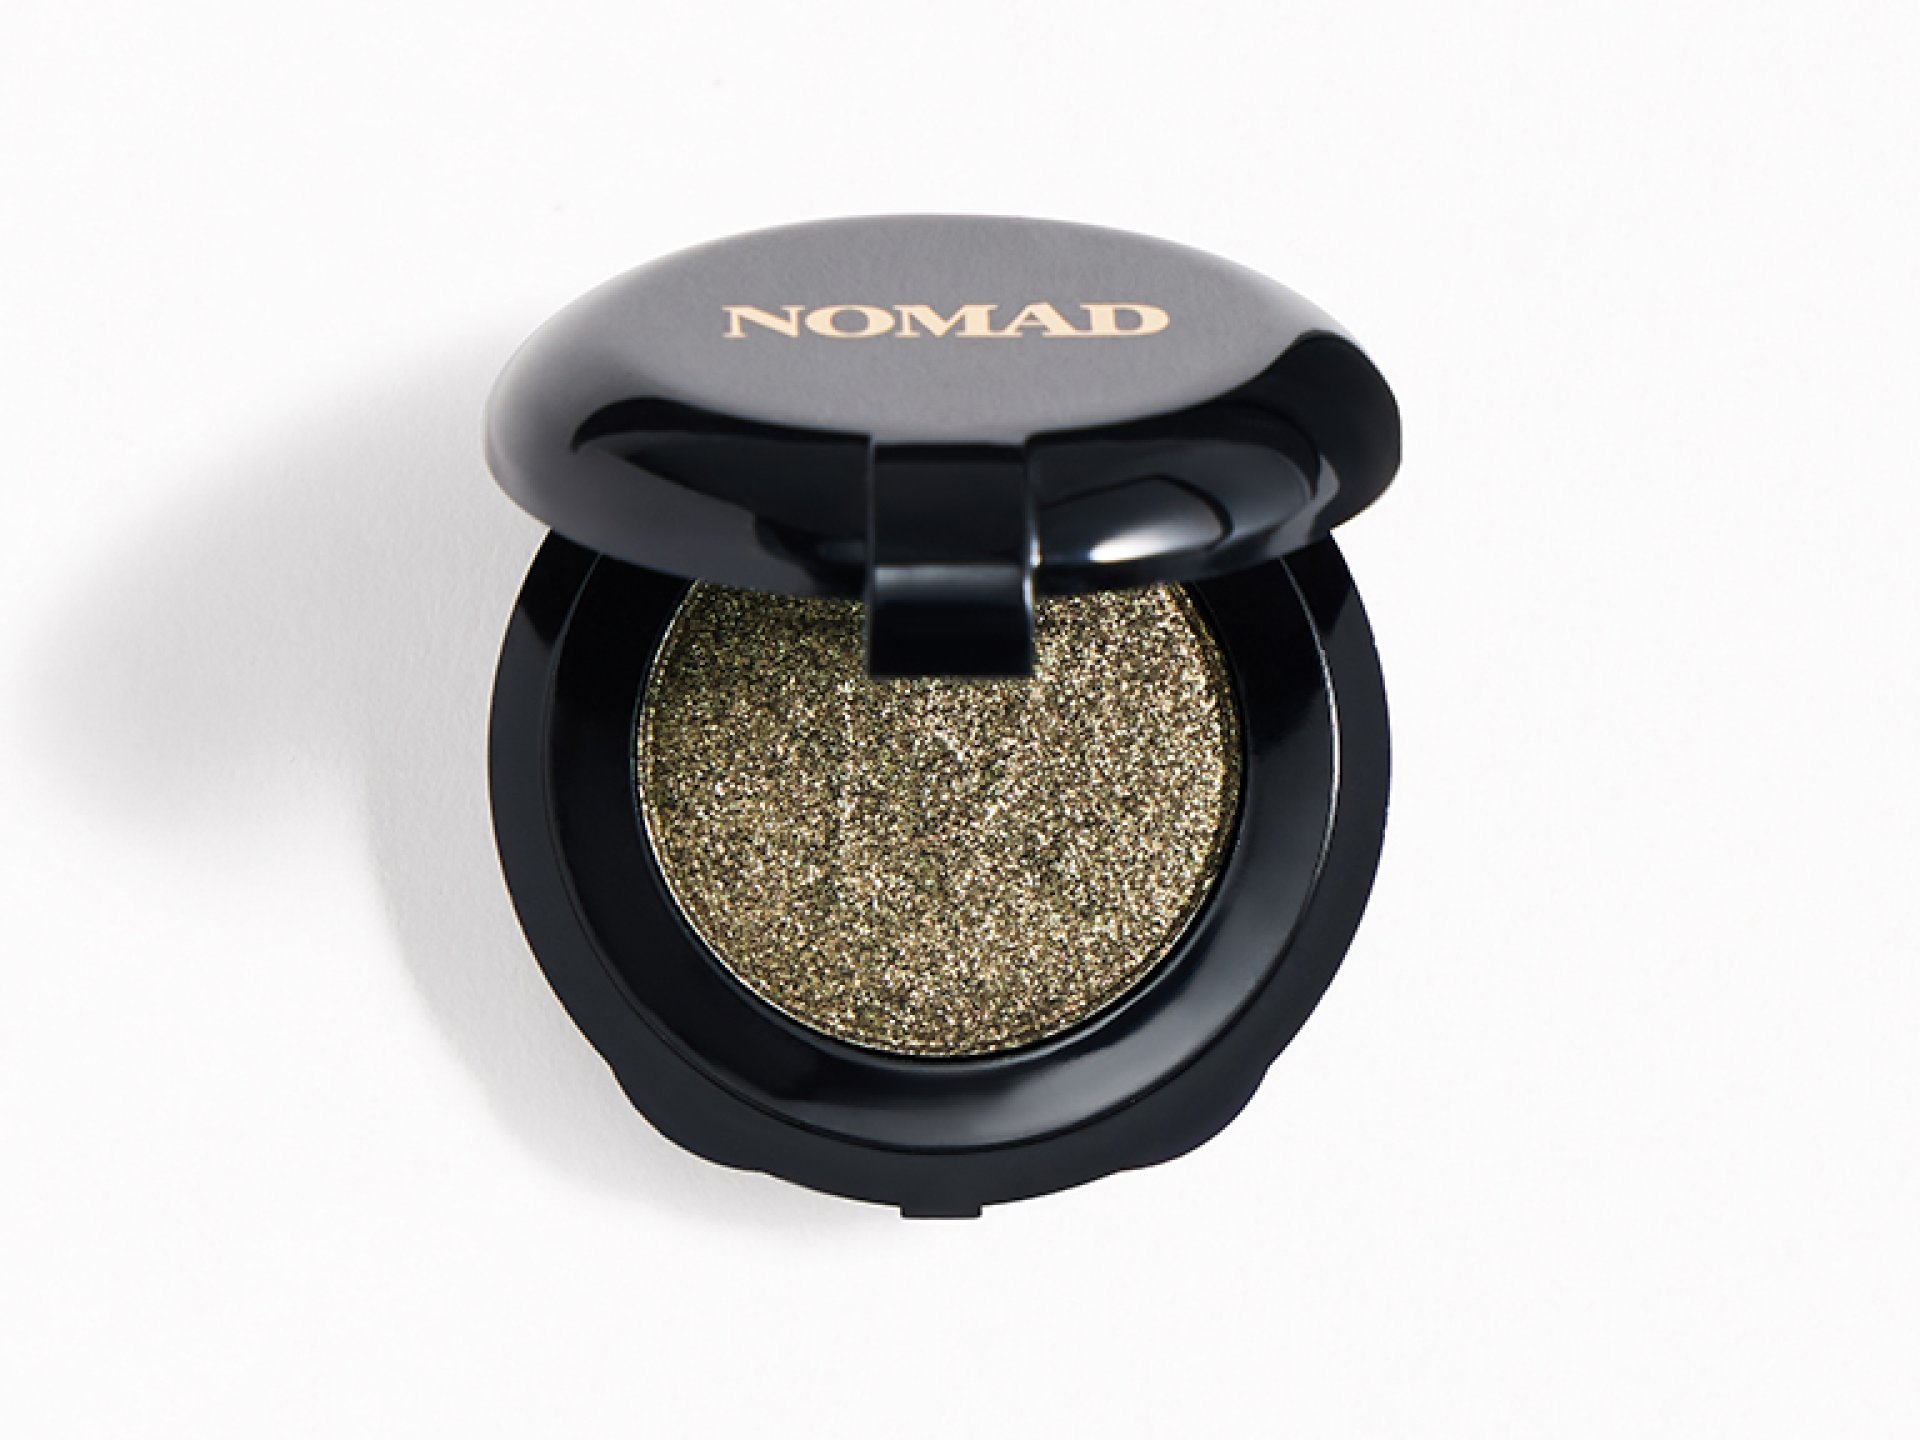 NOMAD COSMETICS NOMAD x Iceland Fire Ice Intense Eyeshadow in Gallow s Lava